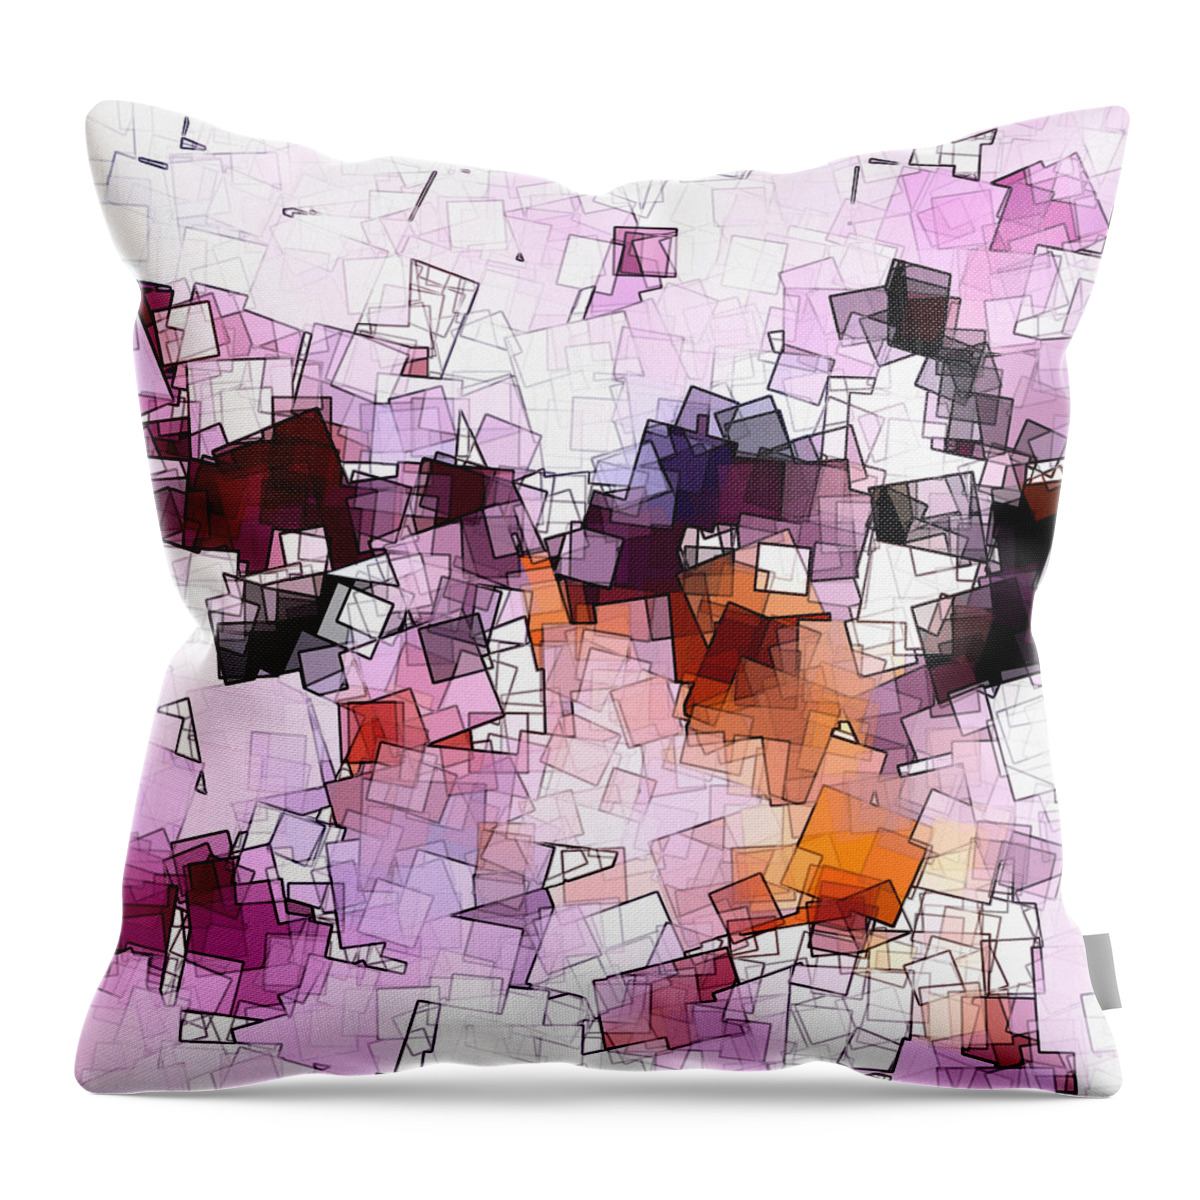 Geometric Abstraction Throw Pillow featuring the digital art Abstract and Minimalist Art Made of Geometric Shapes by Inspirowl Design